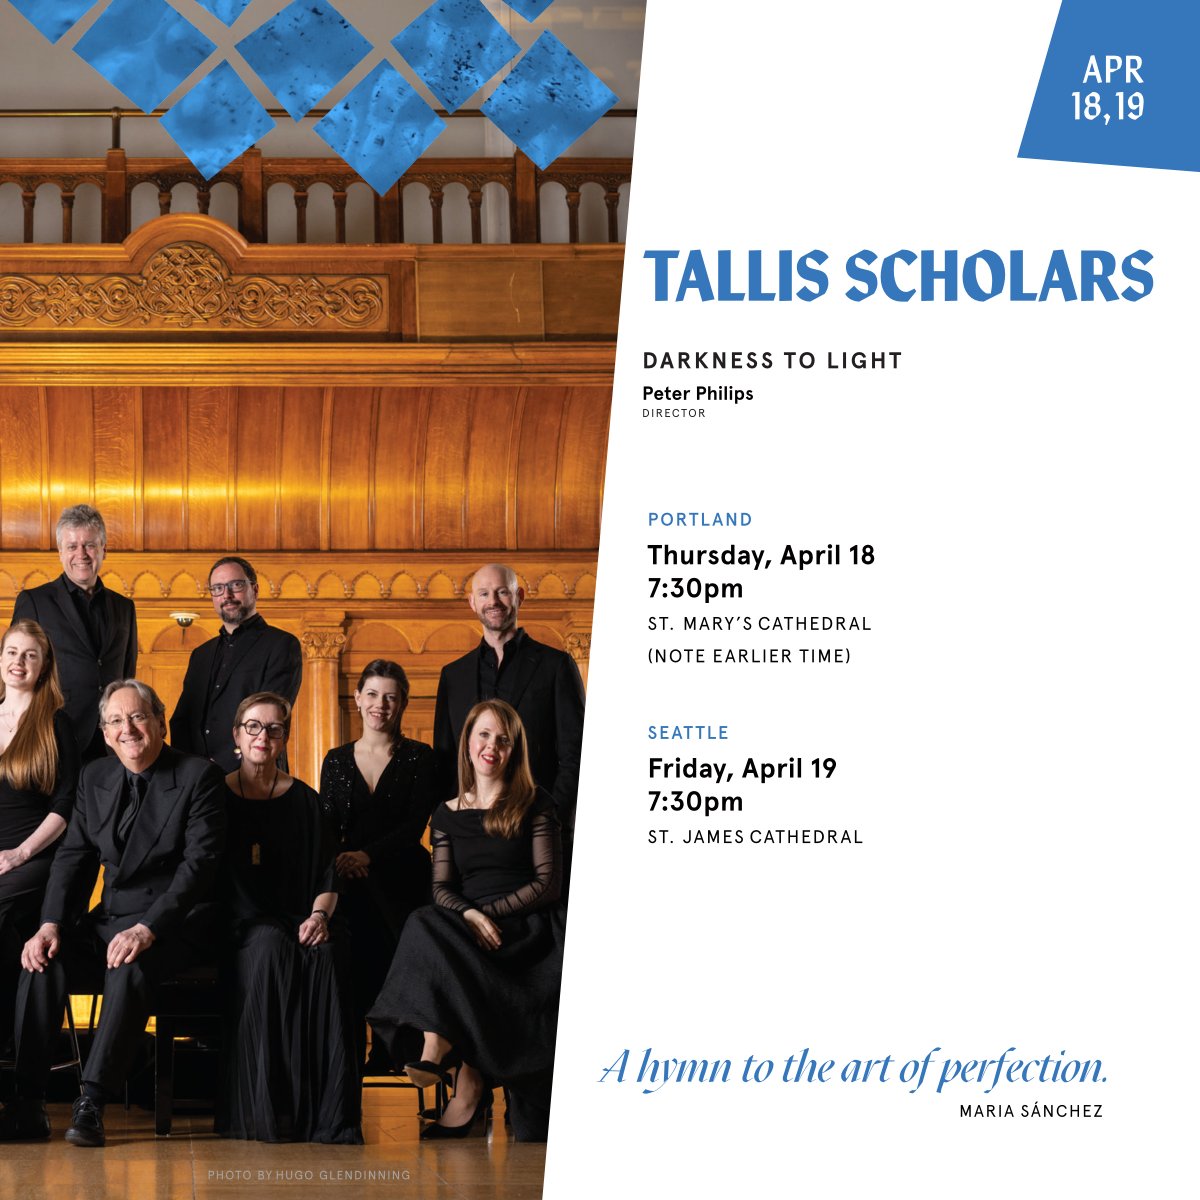 April 18-19, Cappella Romana is thrilled to welcome the @TallisScholars to the Pacific Northwest! Tickets are moving fast – get yours today at cappellaromana.org/tallis